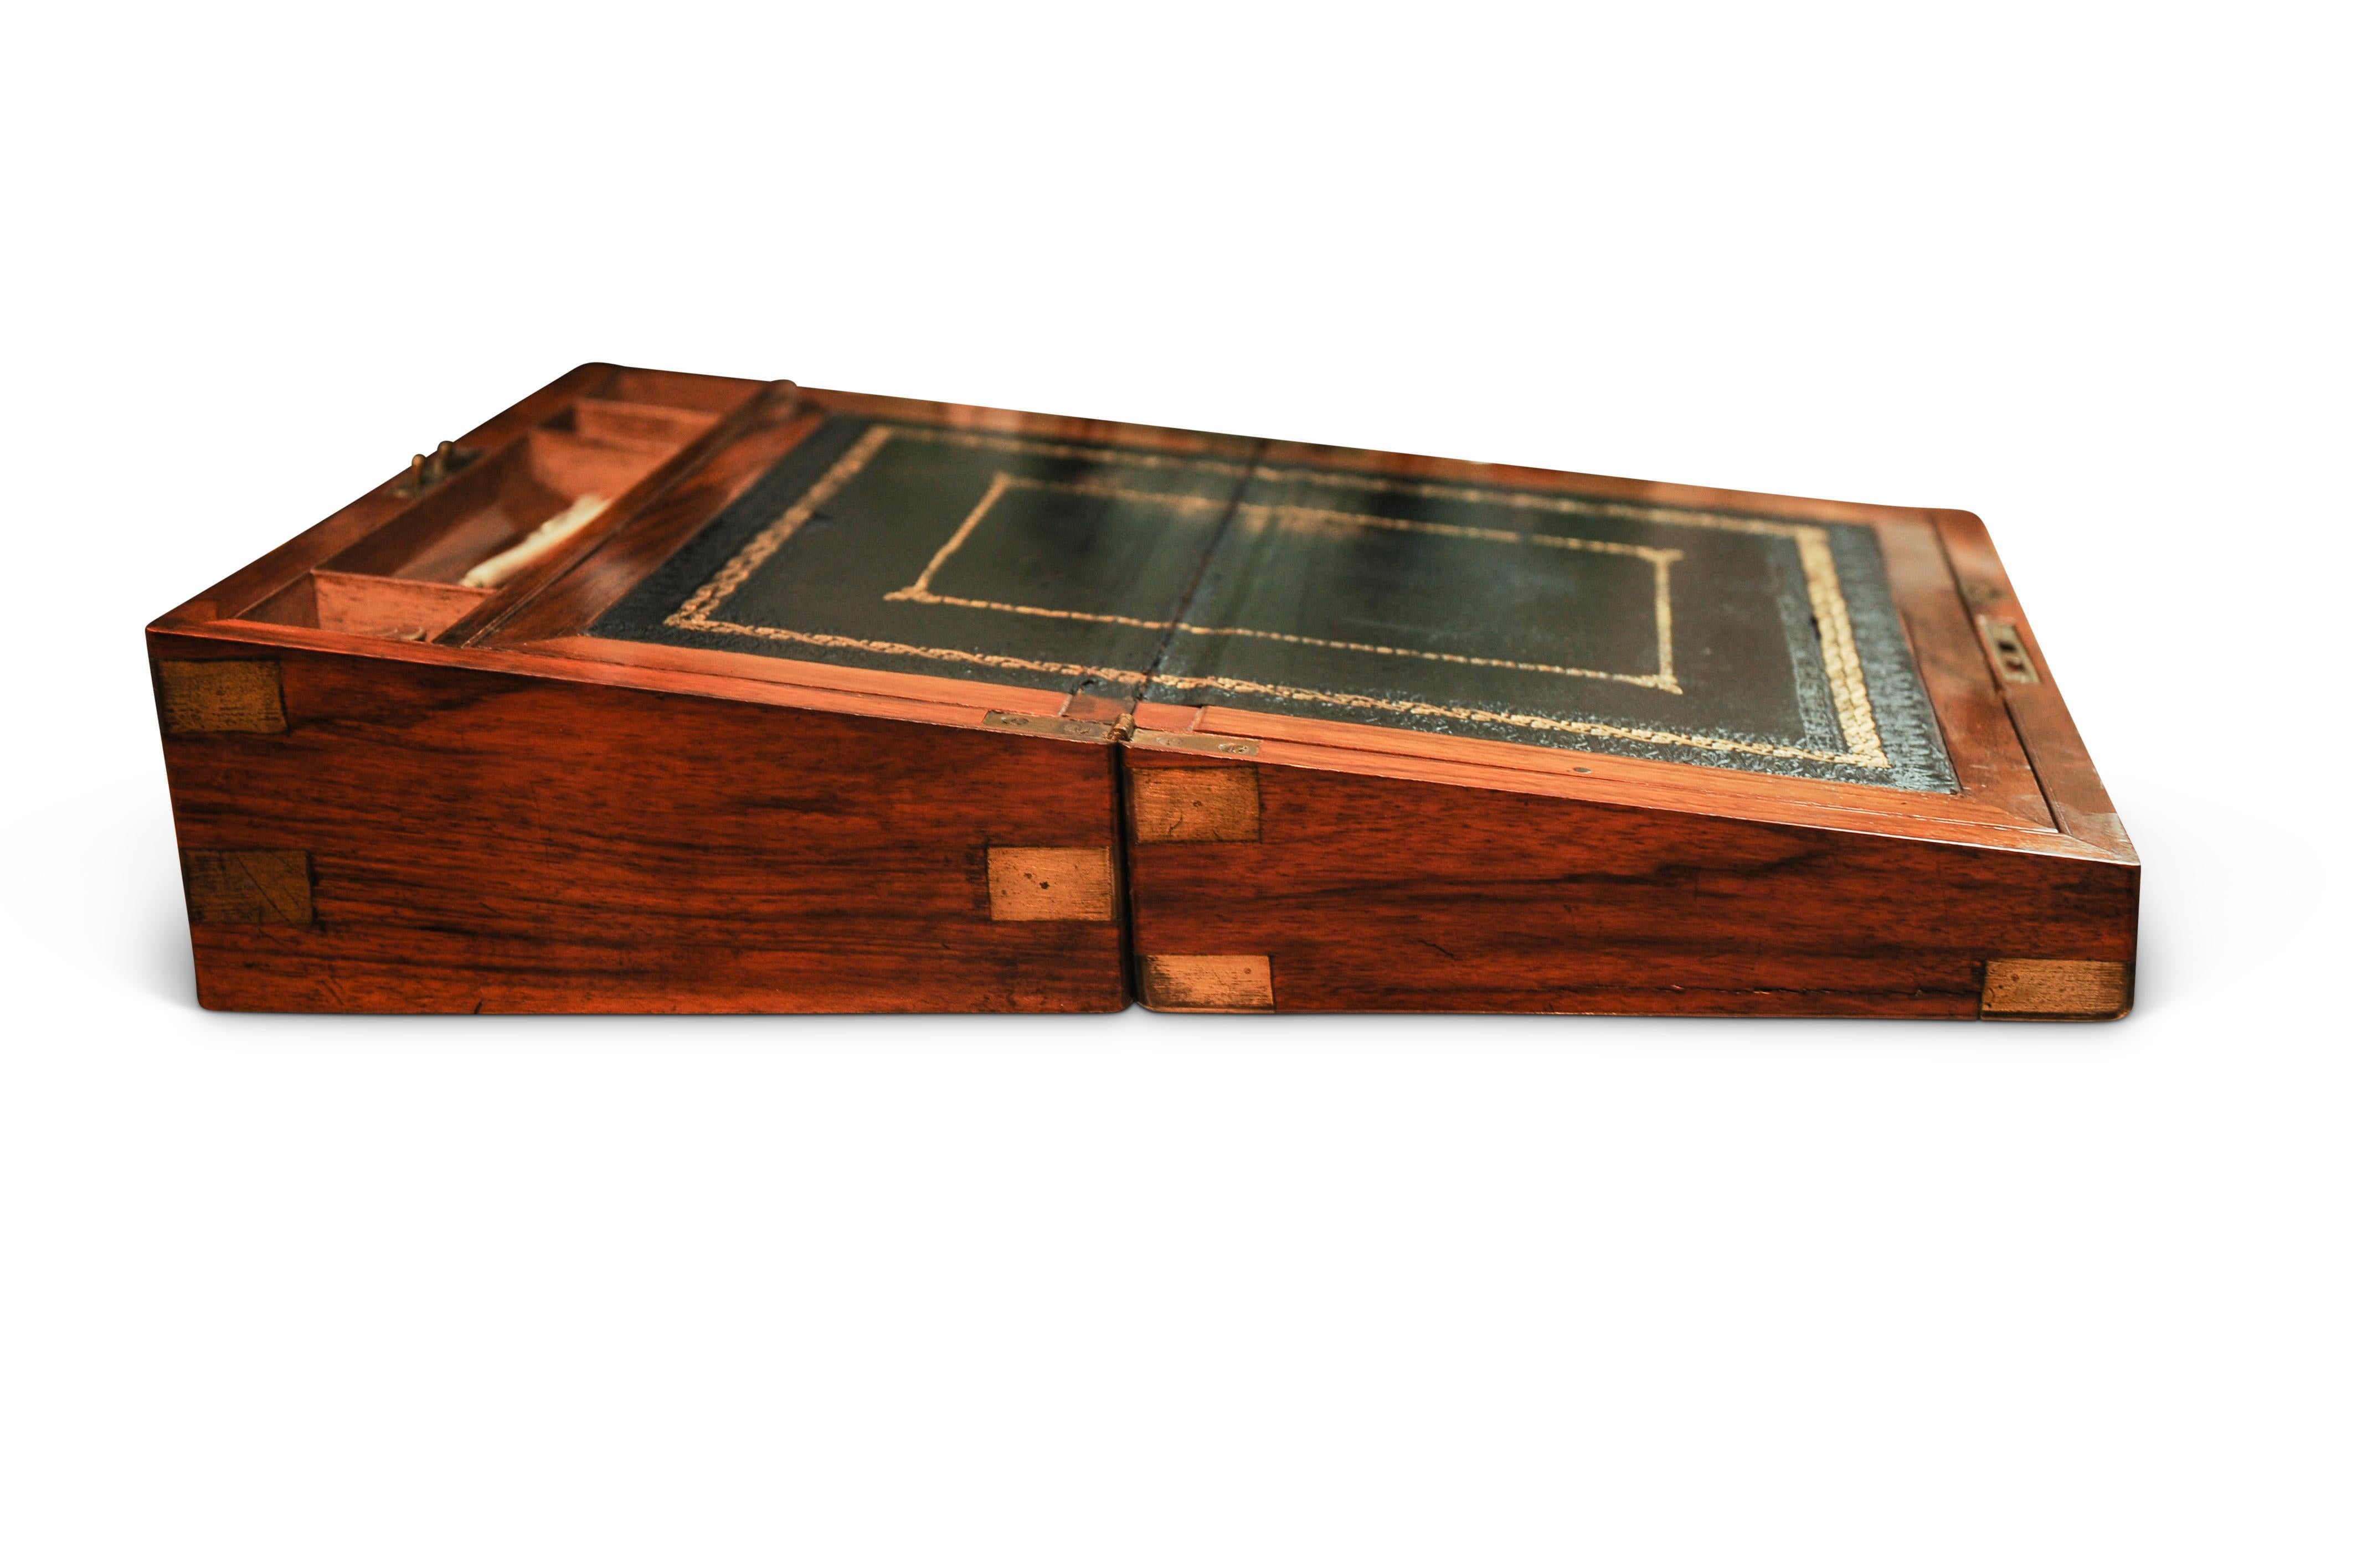 British Colonial Military Campaign Brass Bound Victorian Walnut Veneered Writing Slope with Keys